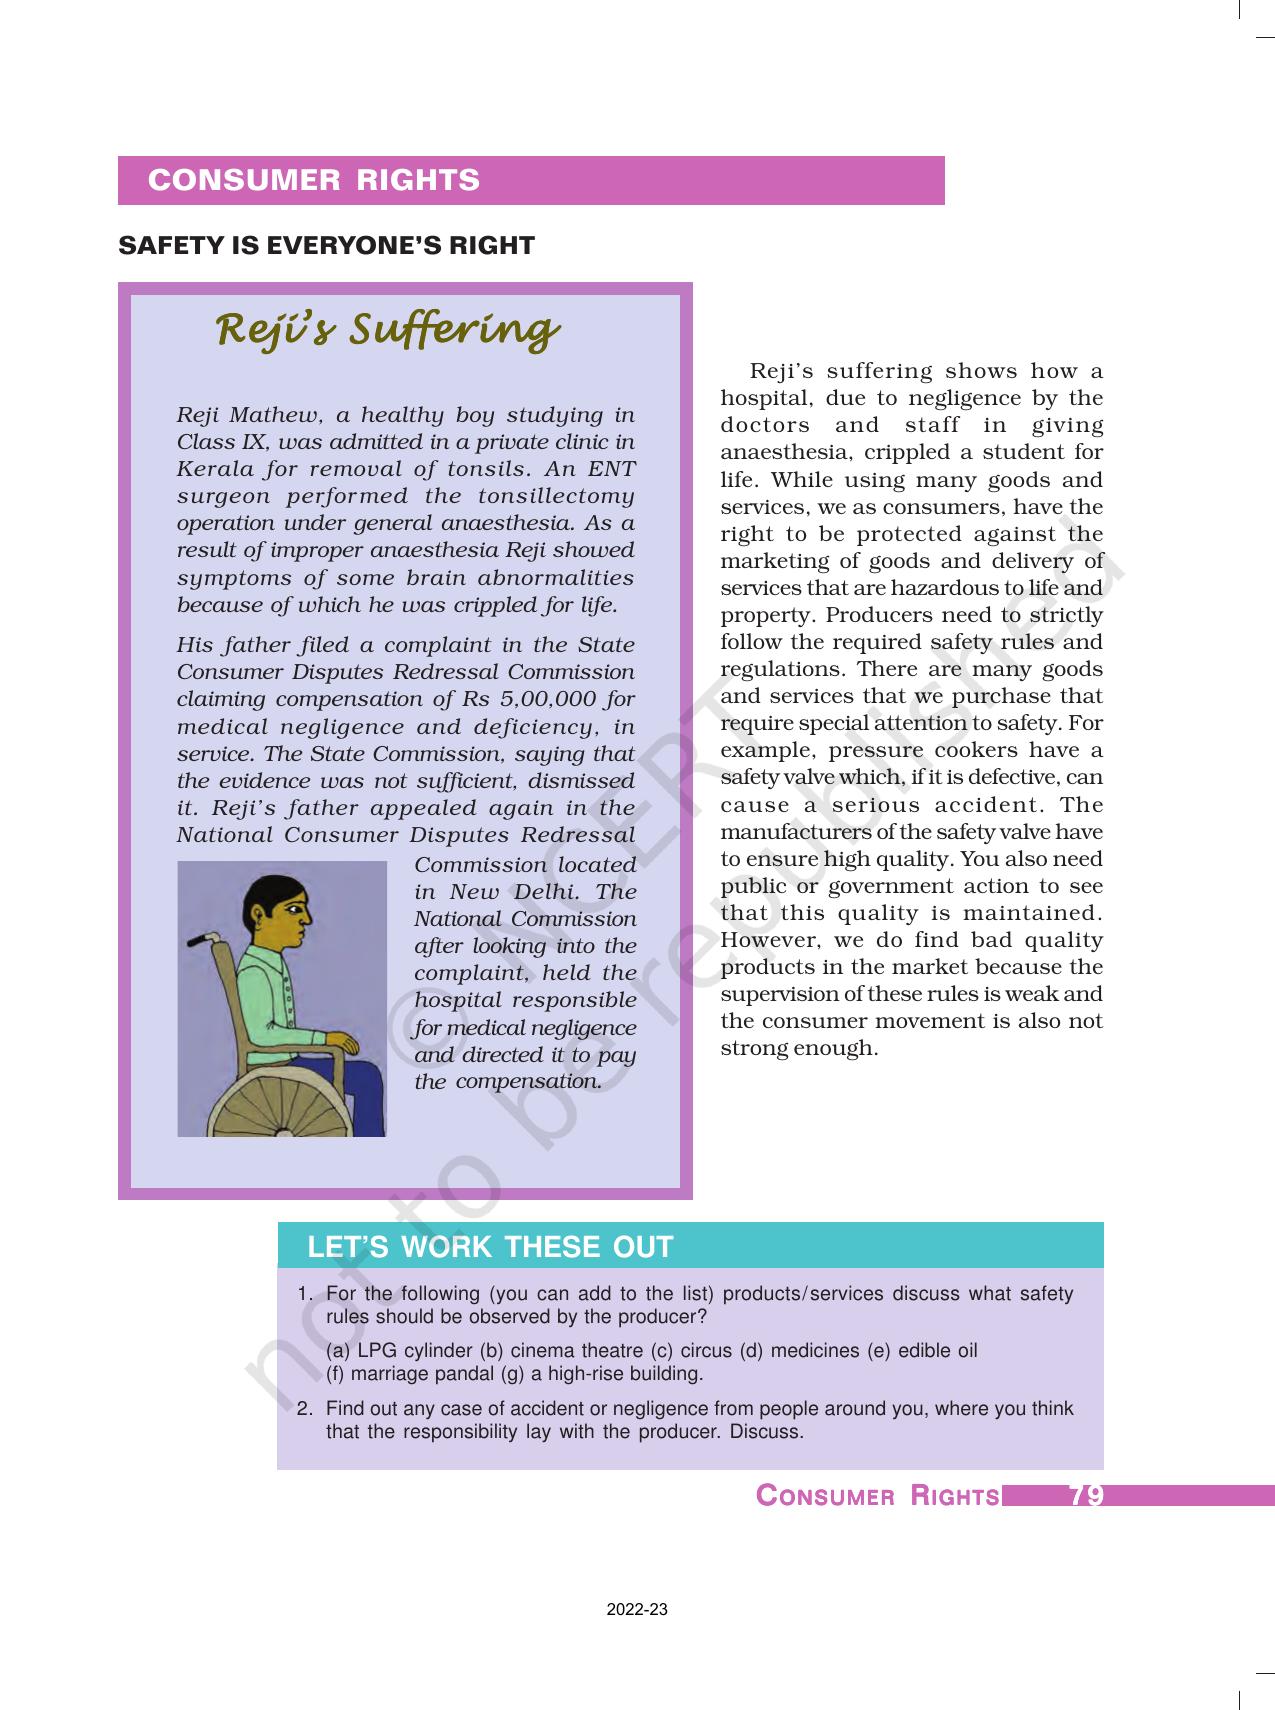 NCERT Book for Class 10 Economics Chapter 5 Consumer Rights - Page 6